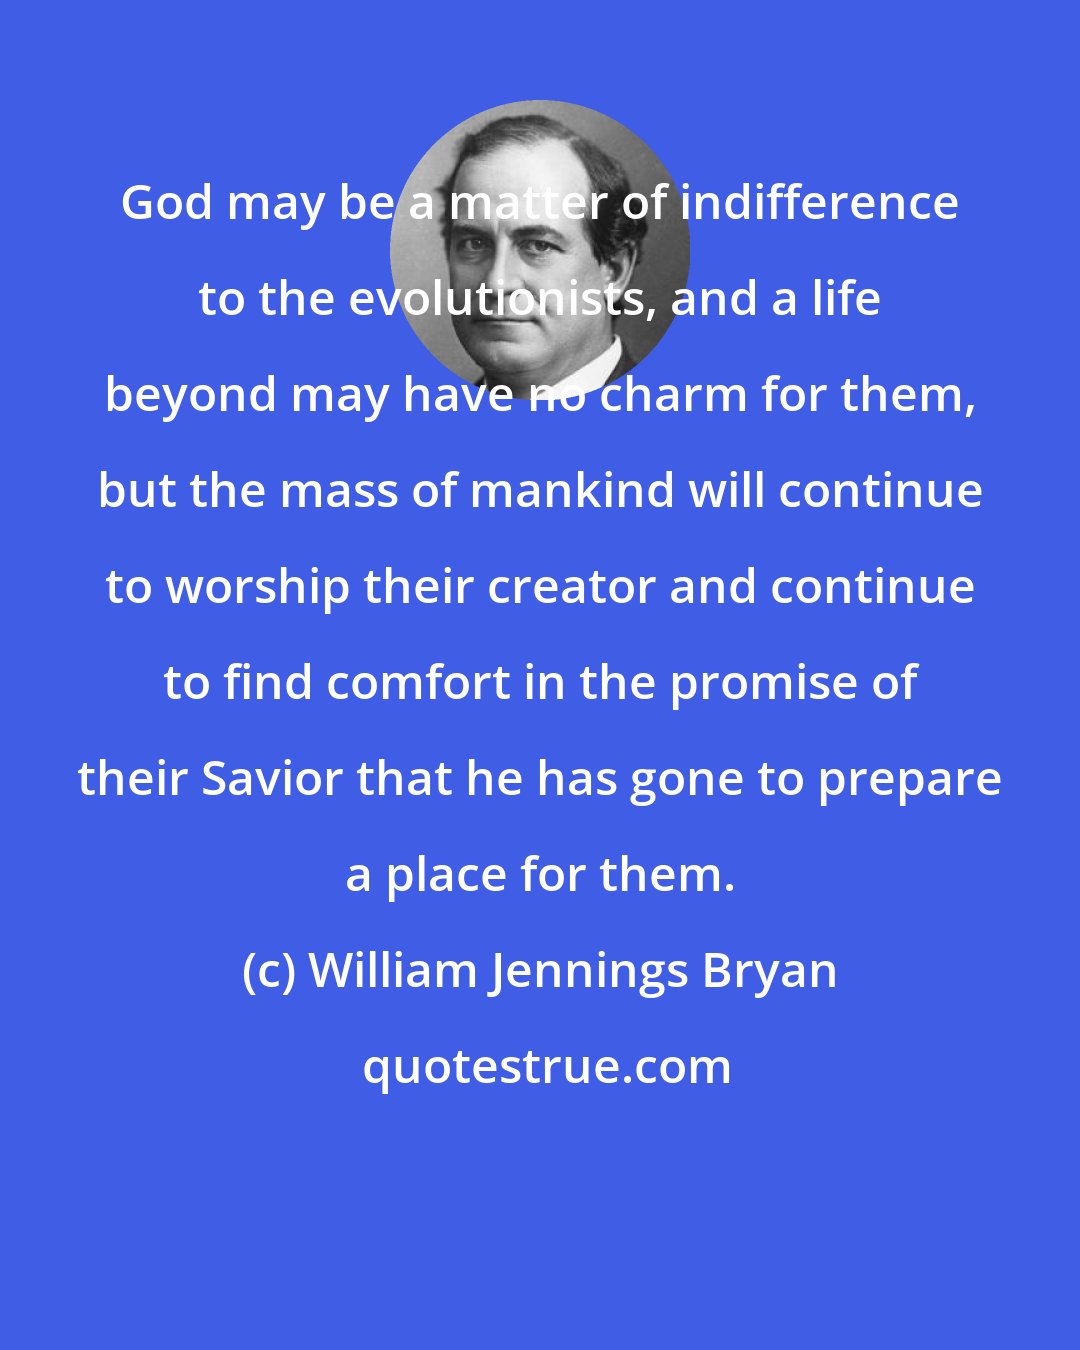 William Jennings Bryan: God may be a matter of indifference to the evolutionists, and a life beyond may have no charm for them, but the mass of mankind will continue to worship their creator and continue to find comfort in the promise of their Savior that he has gone to prepare a place for them.